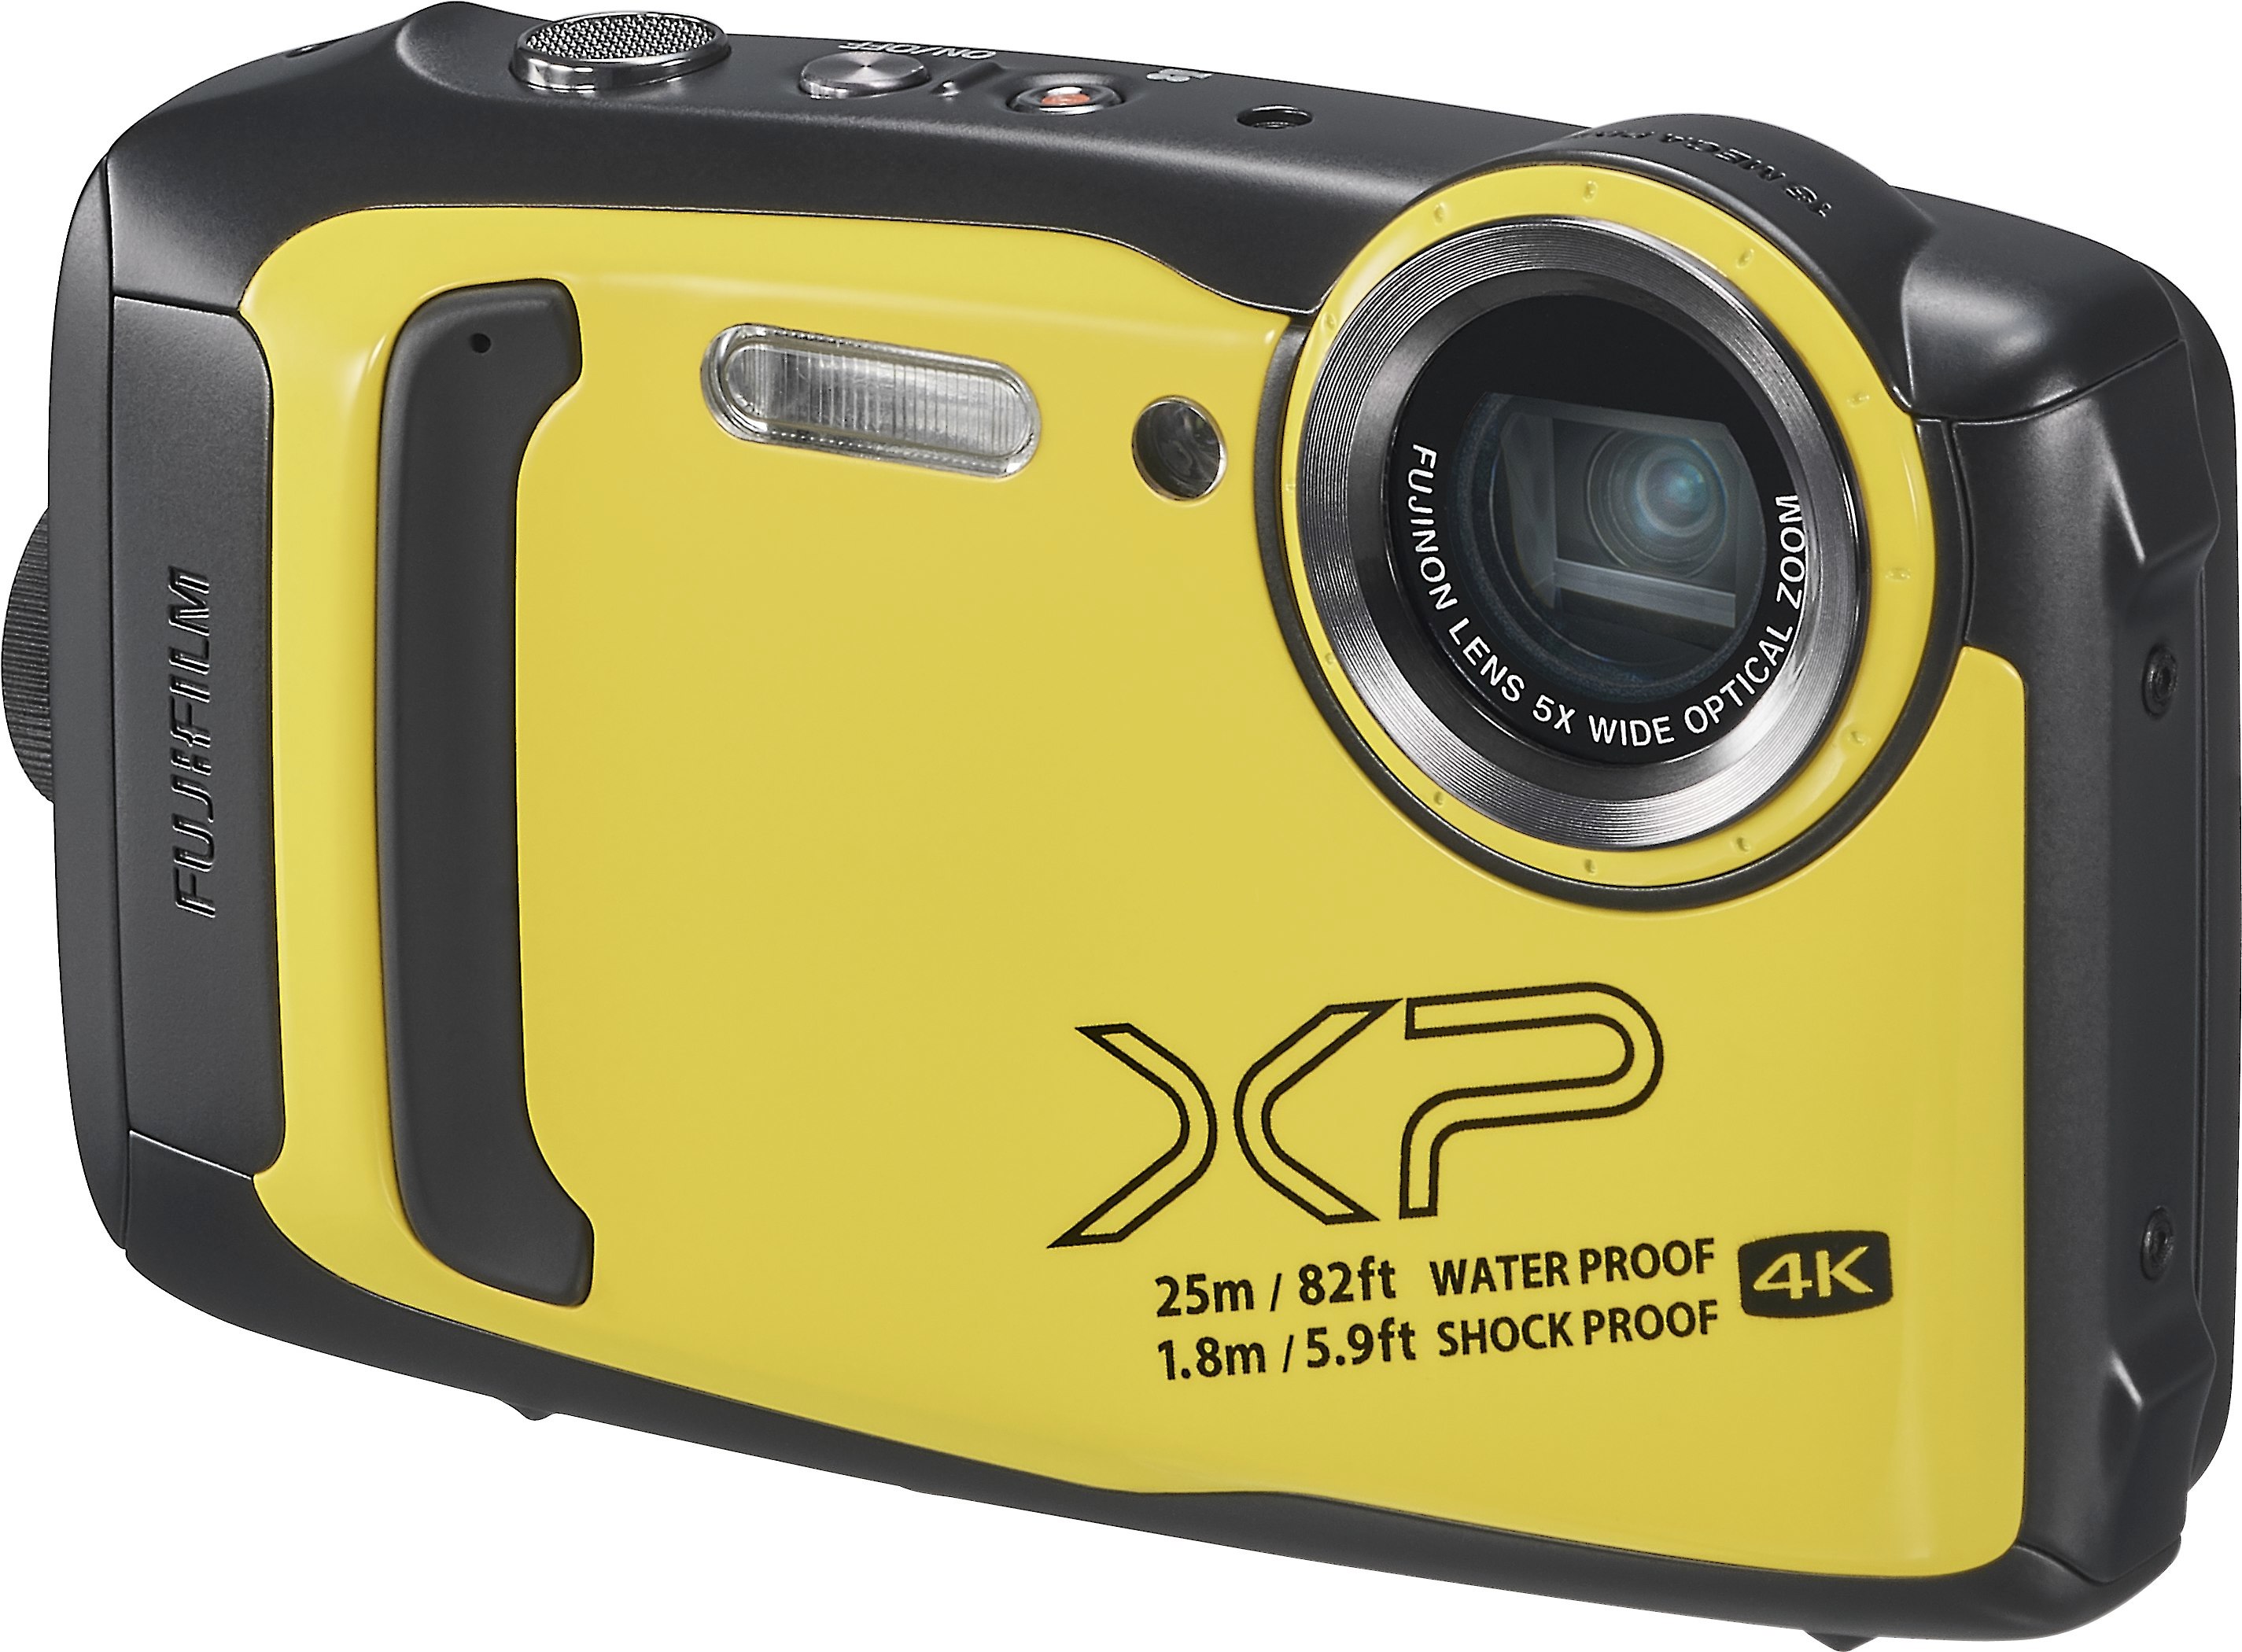 Aanbevolen Bedachtzaam Autonomie Customer Reviews: Fujifilm FinePix XP140 (Yellow) 16.4-megapixel waterproof  camera with 5x optical zoom, Wi-Fi®, Bluetooth®, and SD card at Crutchfield